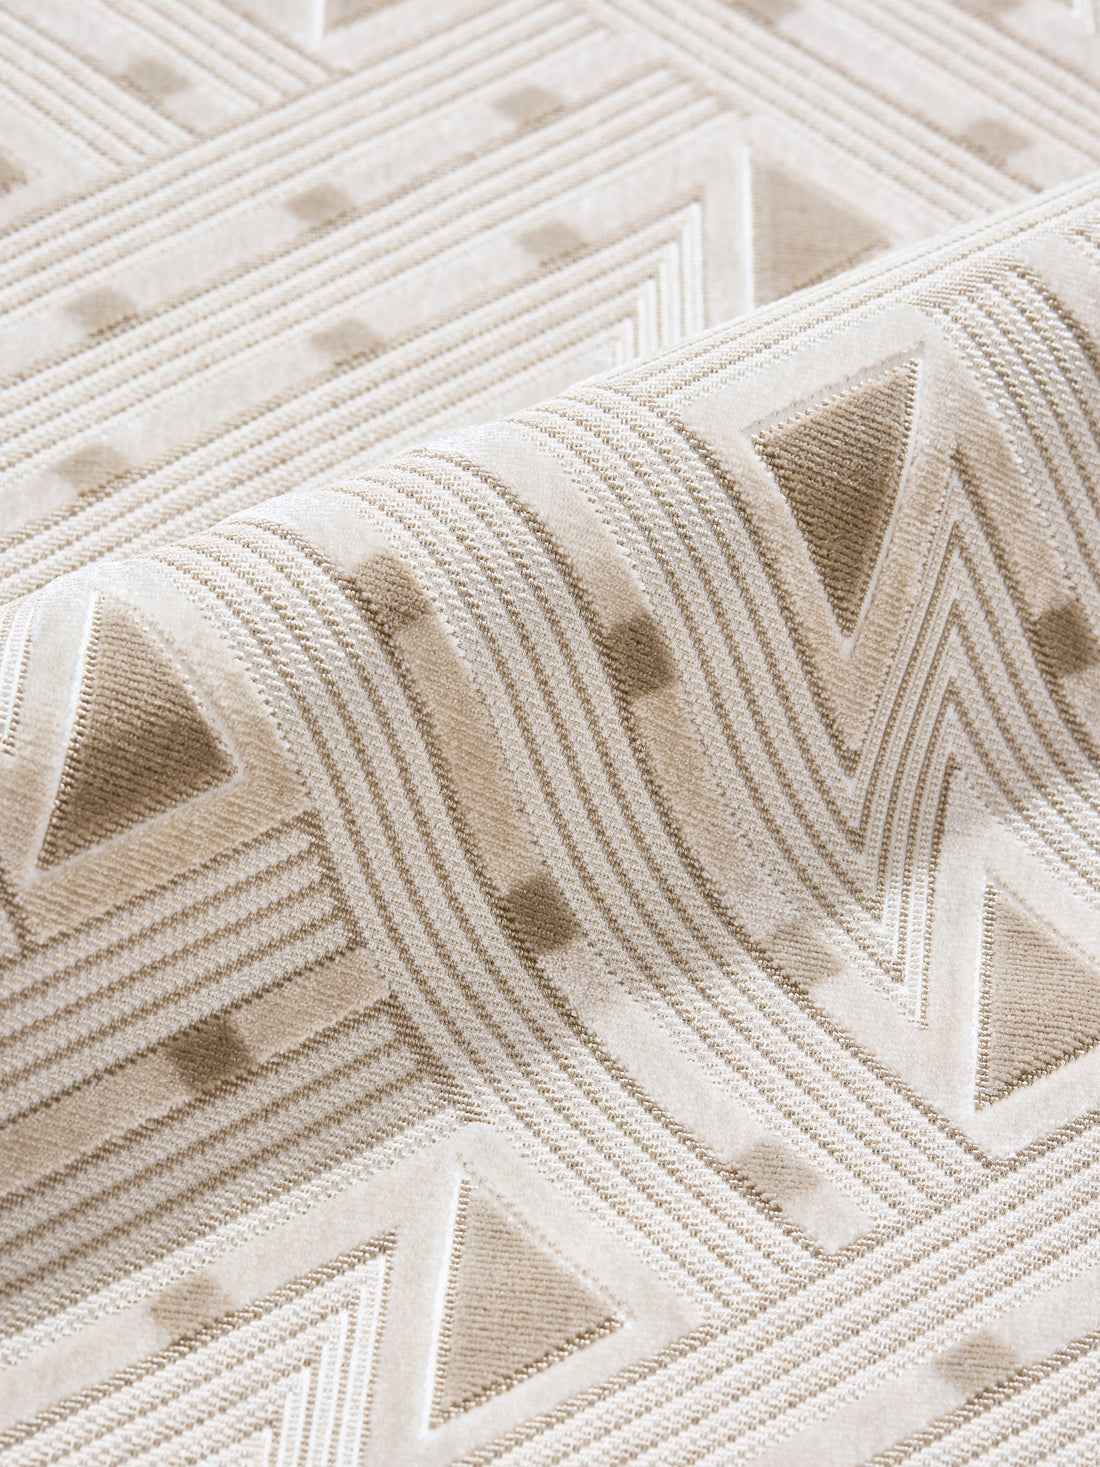 Kasai Velvet fabric in sandstone color - pattern number SC 000127323 - by Scalamandre in the Scalamandre Fabrics Book 1 collection